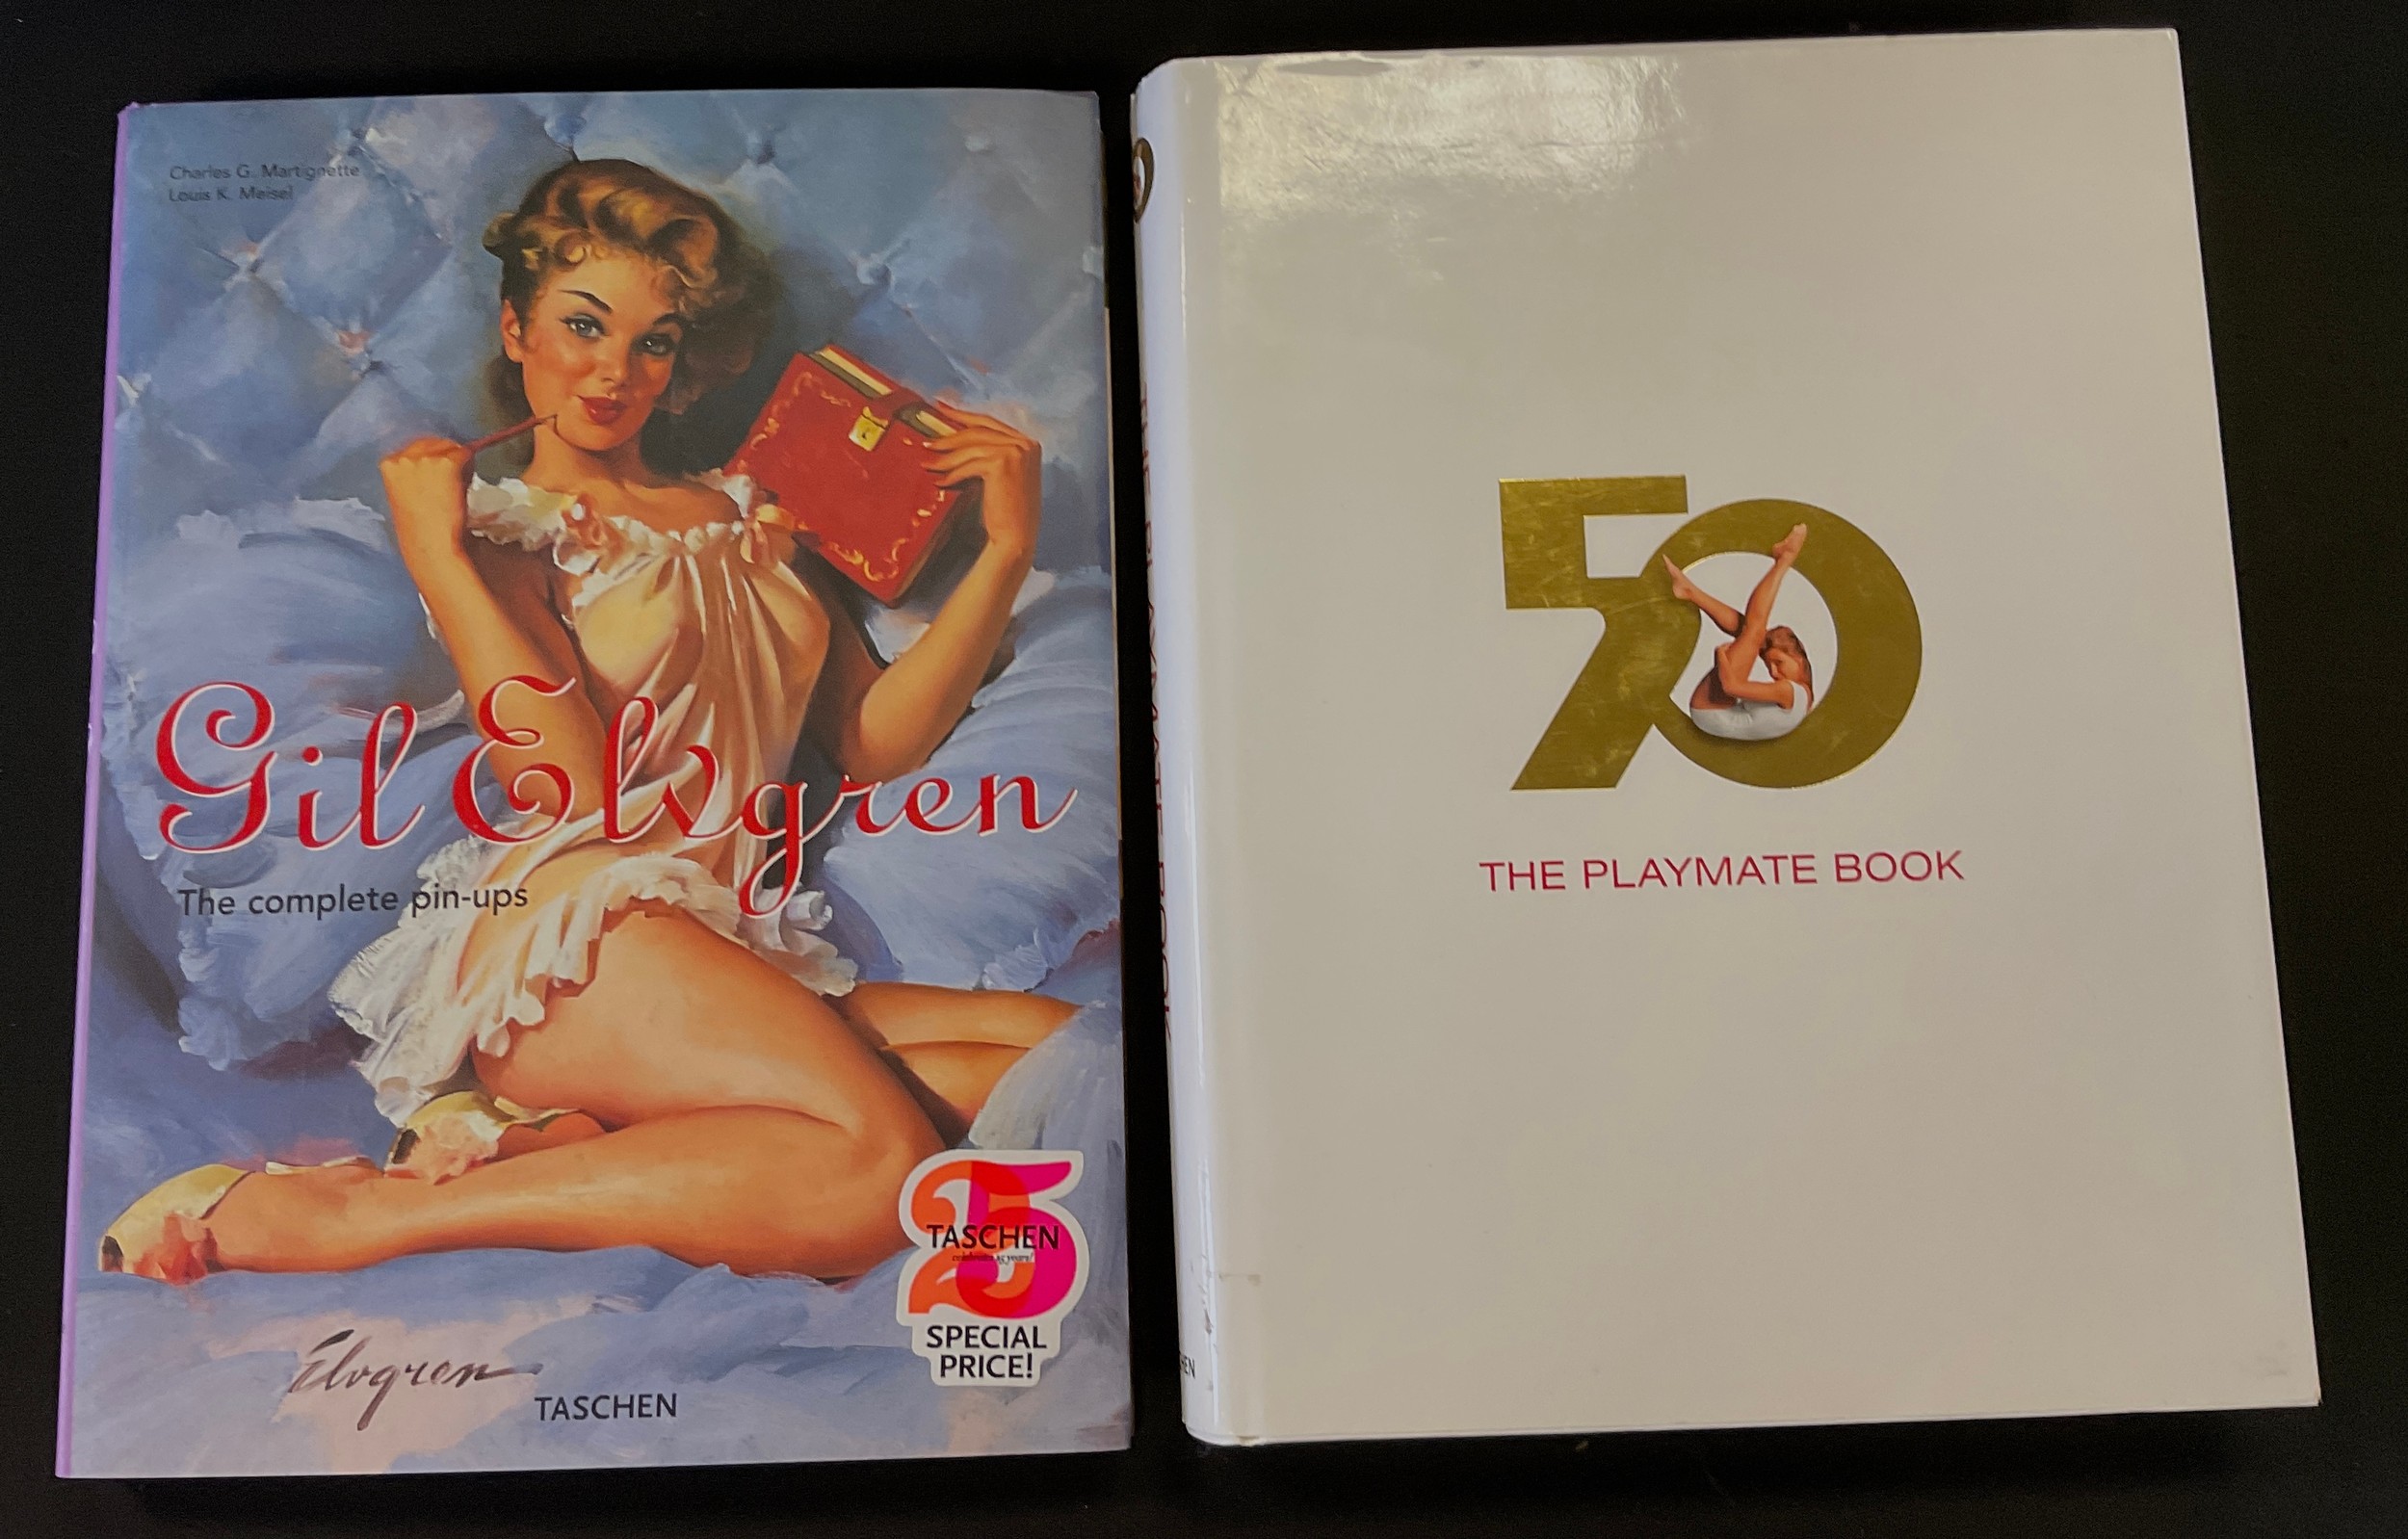 Books - Playboy, The Playmate book, six decades of centrefolds, Taschen publishing; another Gil